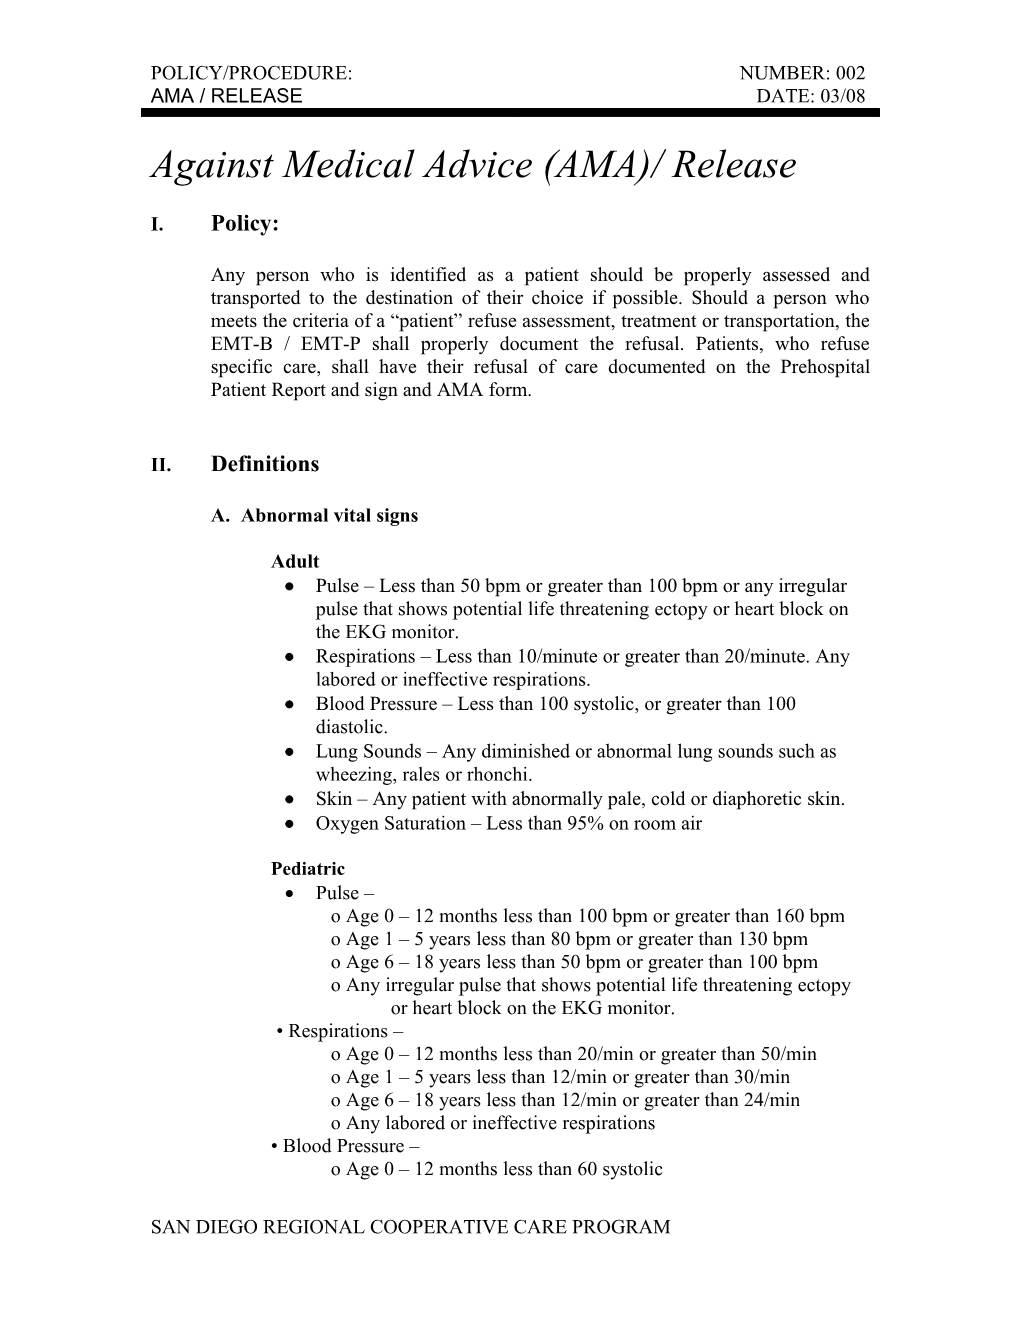 Against Medical Advice (AMA)/ Release